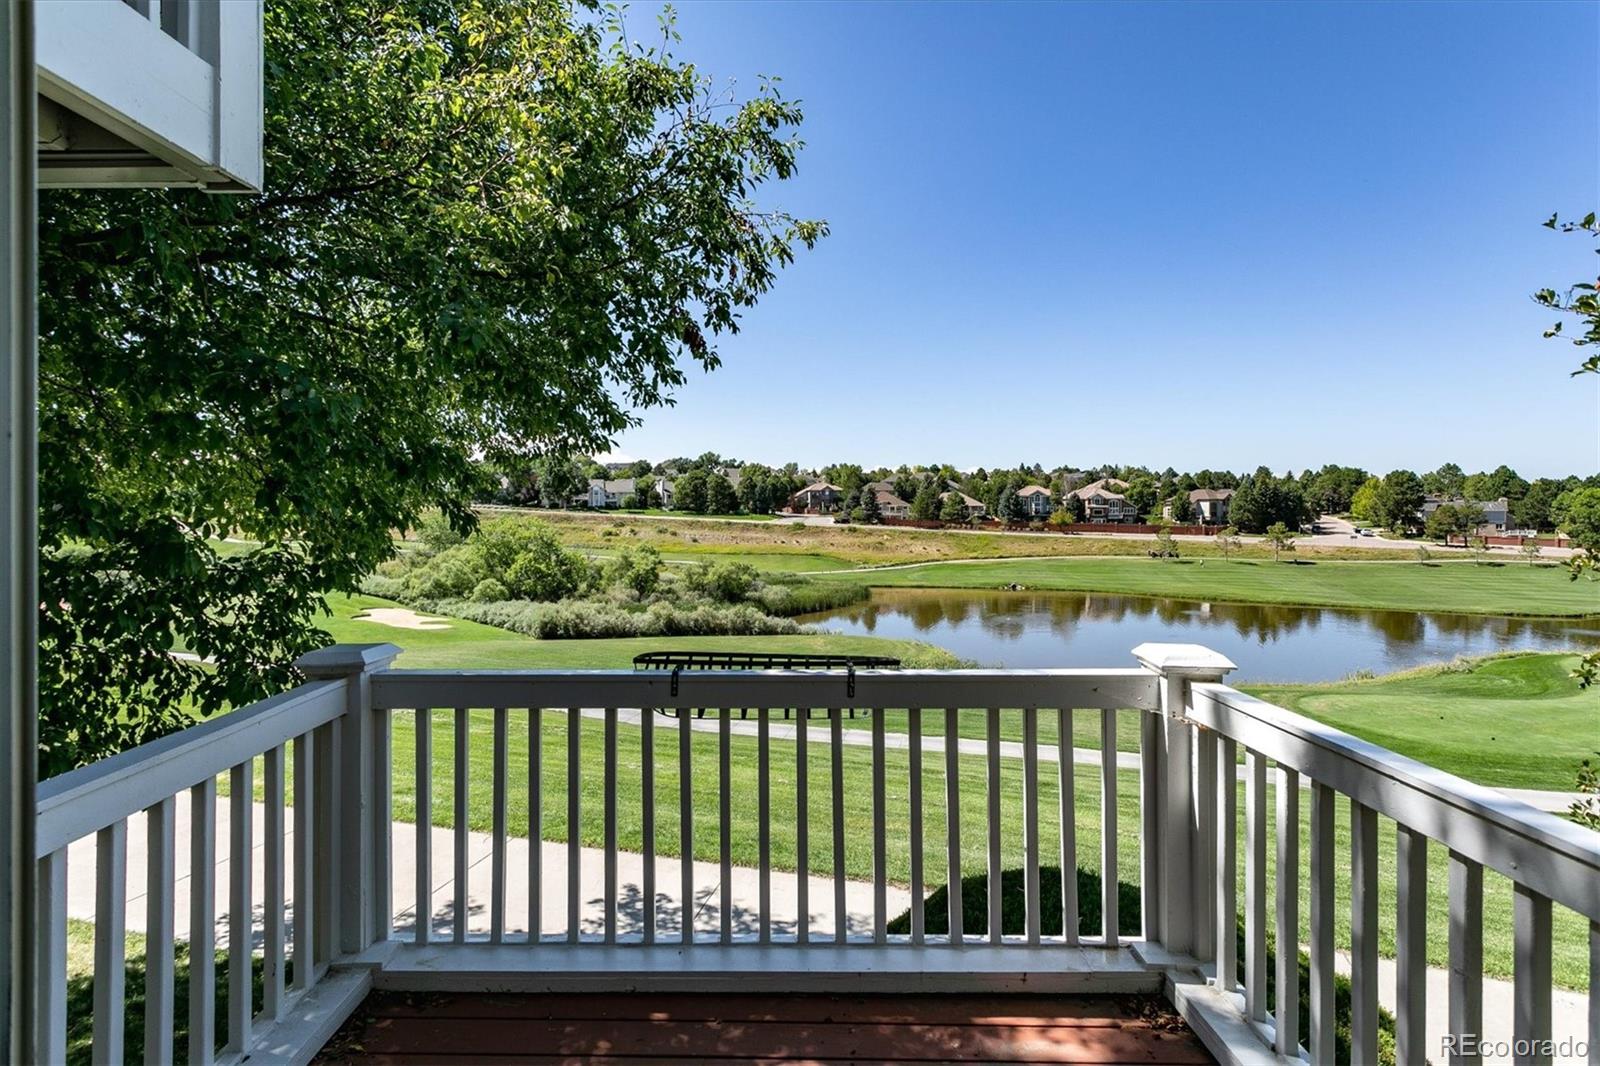 8666  ainsdale court, Lone Tree sold home. Closed on 2024-03-01 for $585,000.